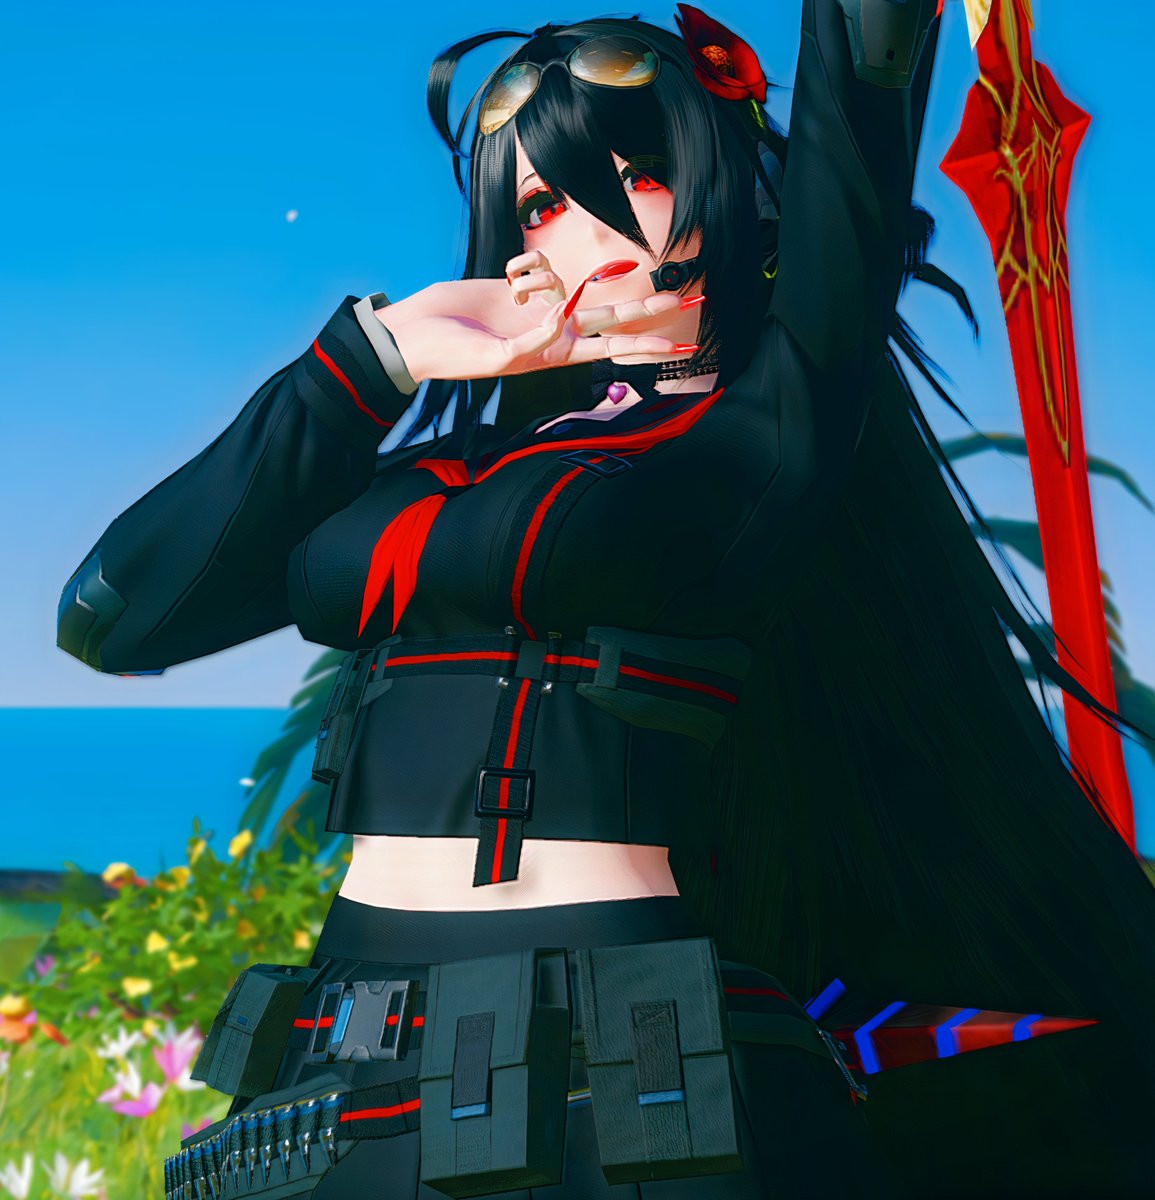 ⁦#PSO2NGS⁩ ⁦
#PSO2NGS_SS⁩ 
⁦#メンテの日じゃないけどssを貼る
『黒』 &『赤』の新しい学校の制服~🖤♥️
New school uniform🅱🅻🅰🅲🅺  &  🆁🅴🅳~ 🖤♥️

〔´∇｀〕╯